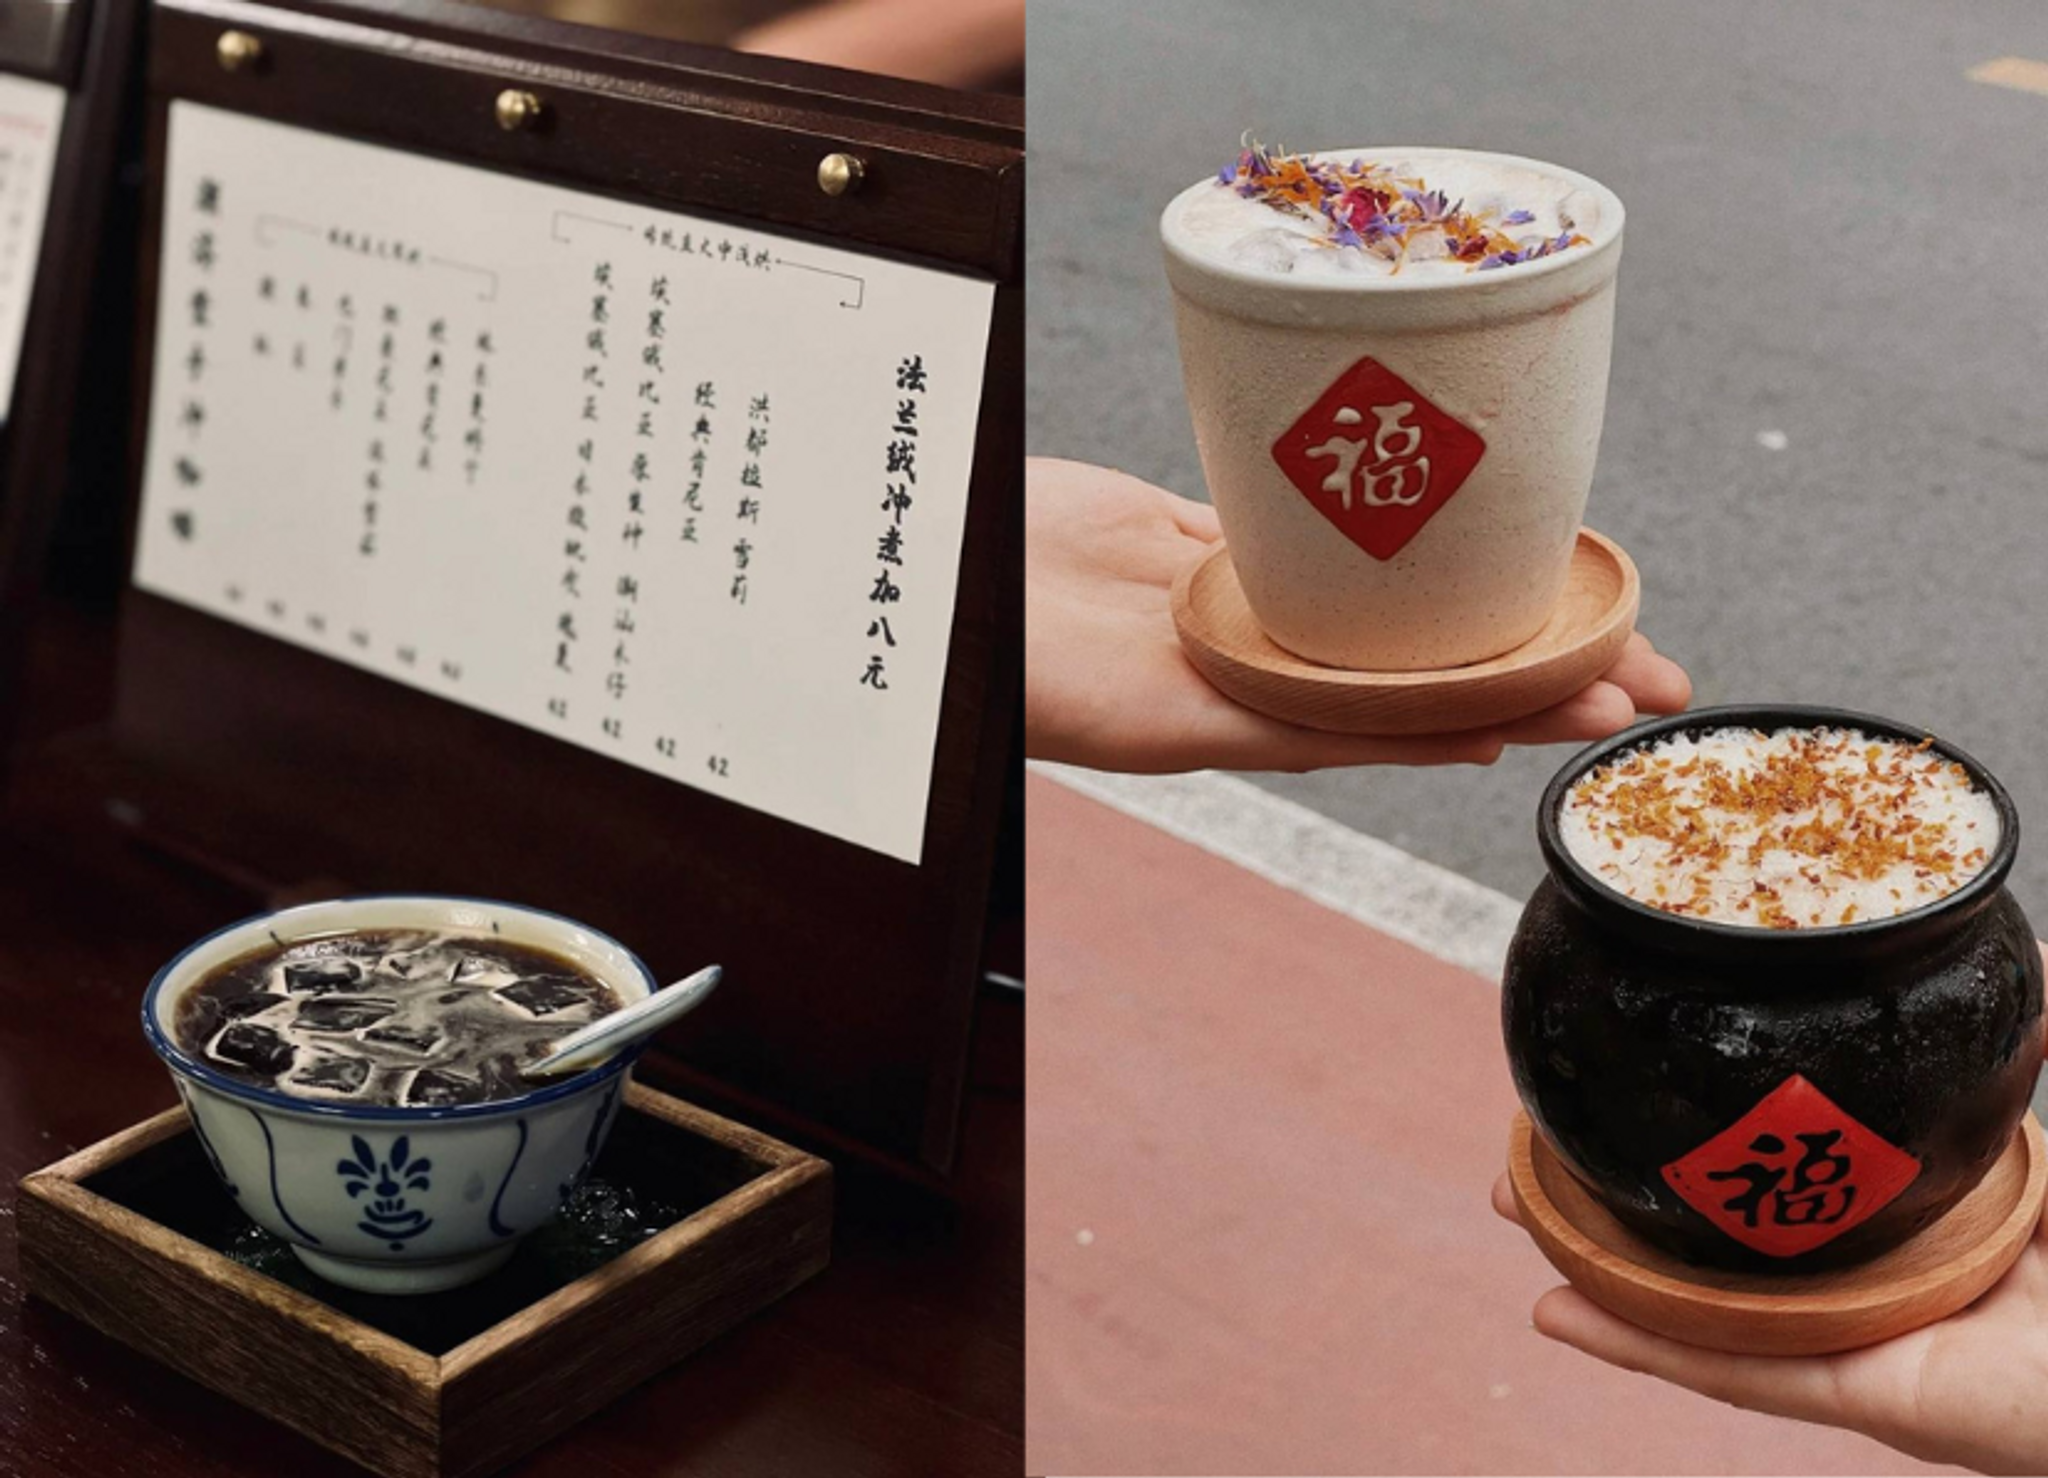 Chinese-style coffee is thriving among proud Gen Zers